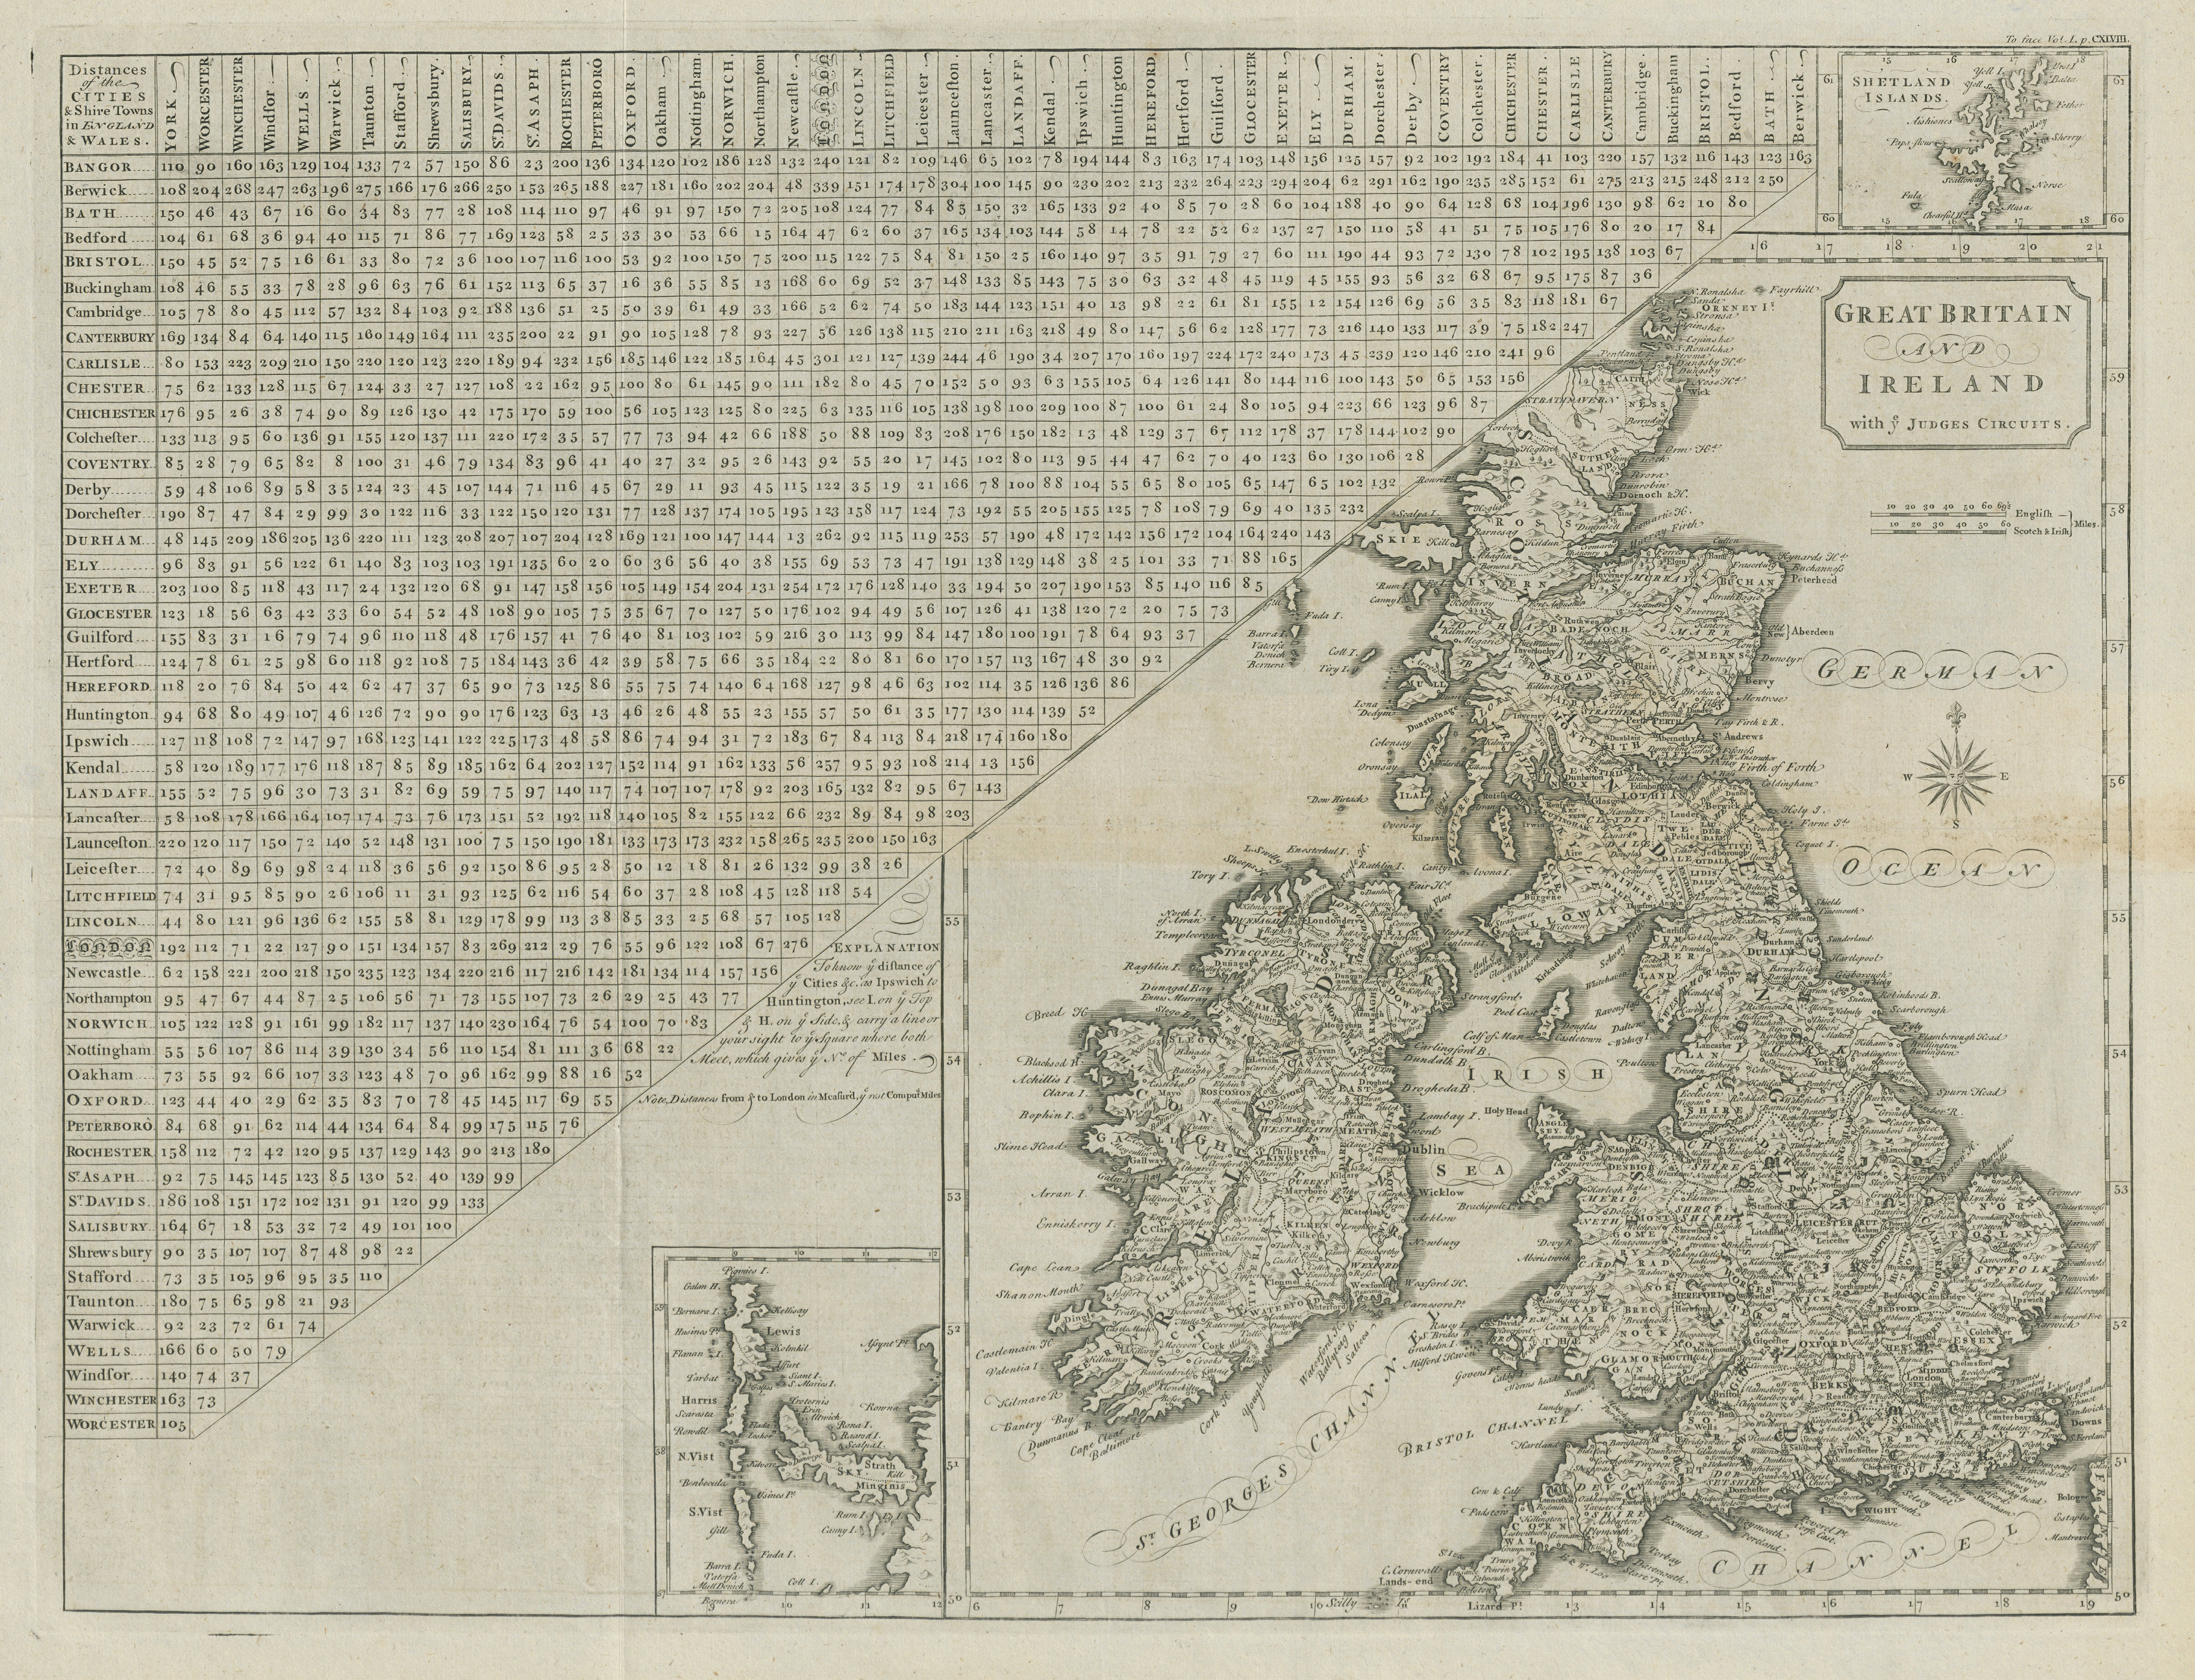 Associate Product "Great Britain and Ireland with ye Judges circuits" by John CARY 1789 old map